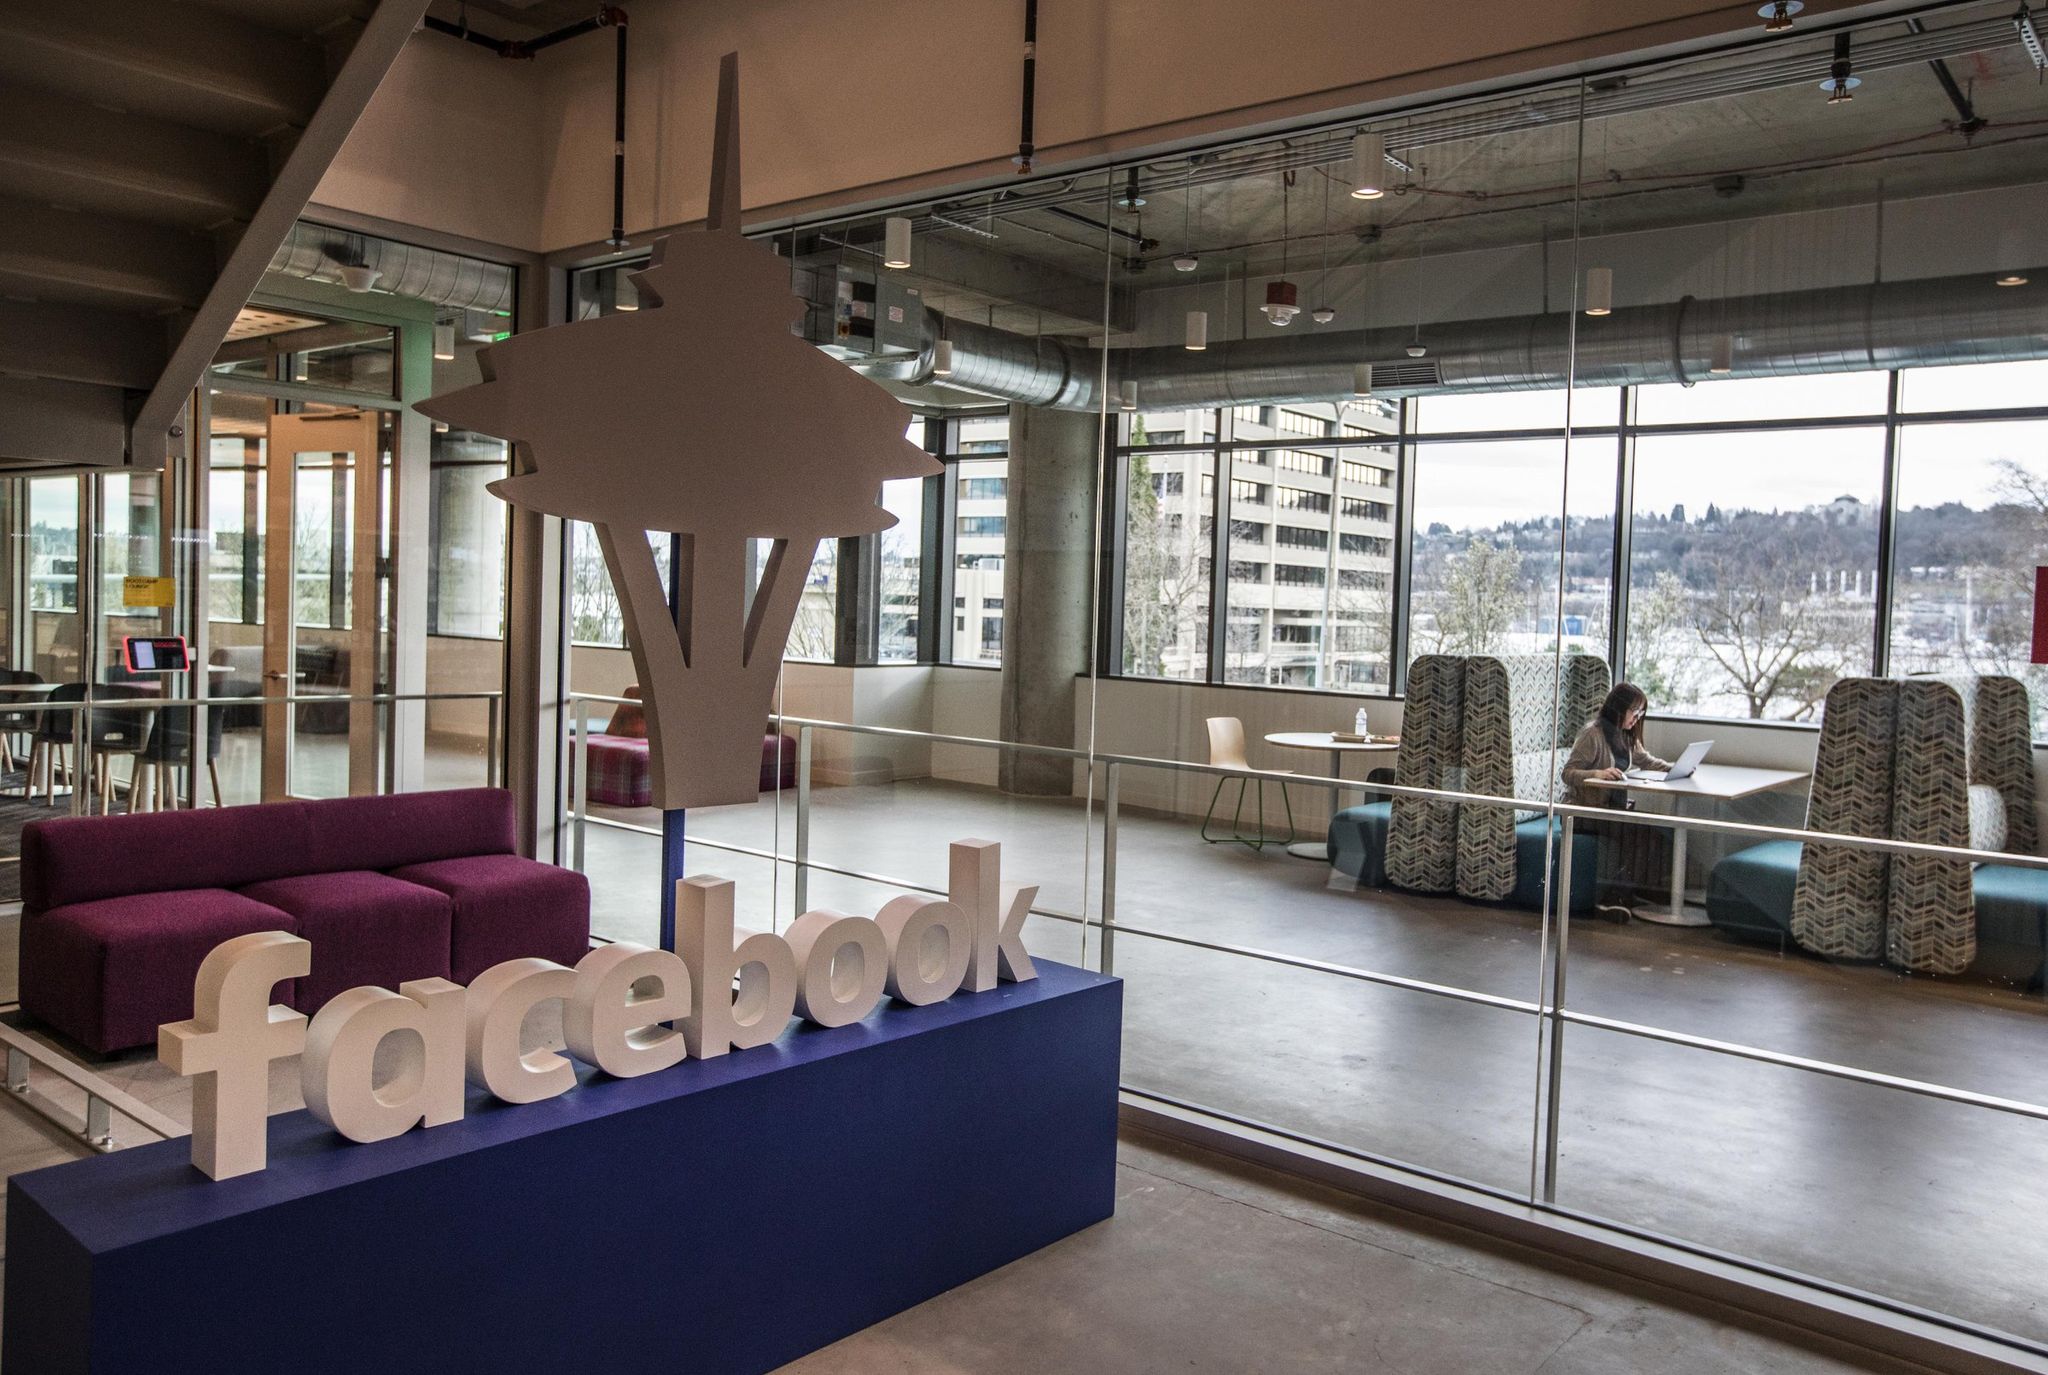 Facebook, with 2,000 employees in Seattle, expands into new building ...